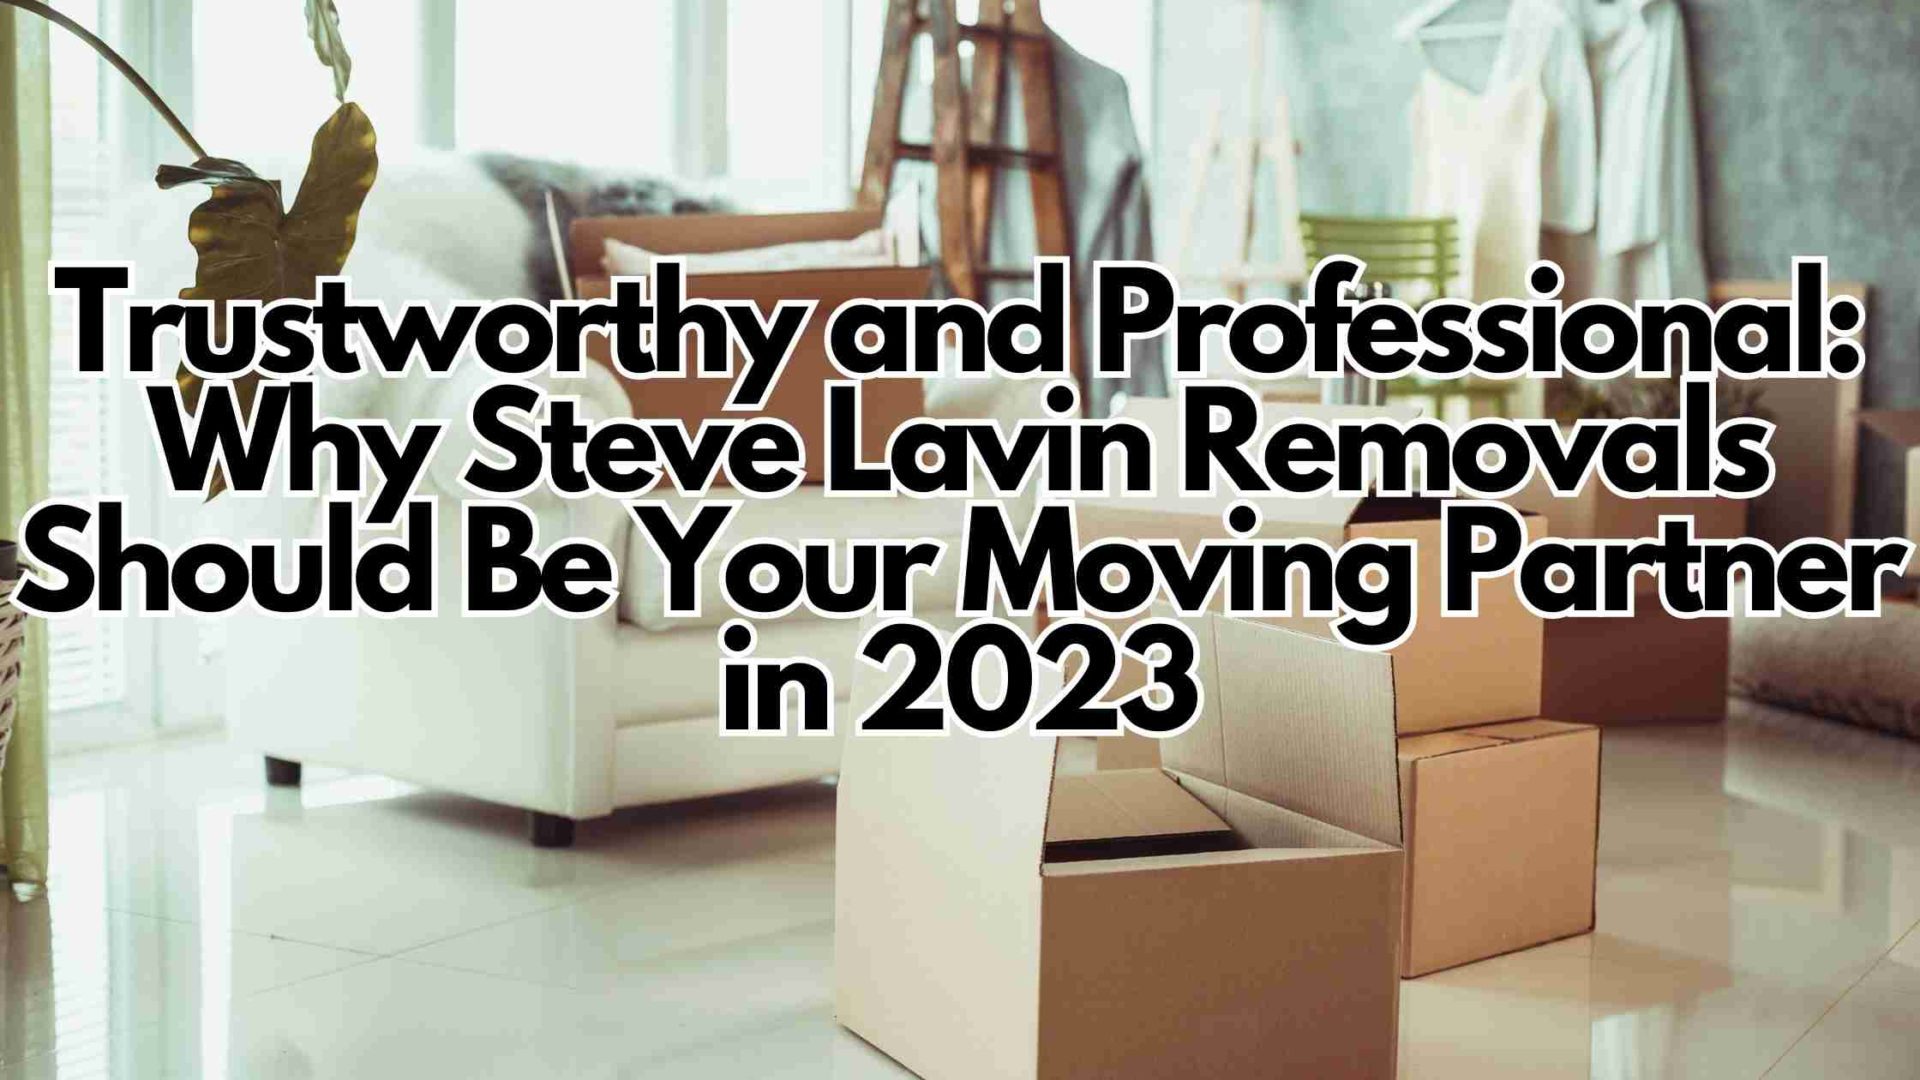 Trustworthy and Professional: Why Steve Lavin Removals Should Be Your Moving Partner in 2023